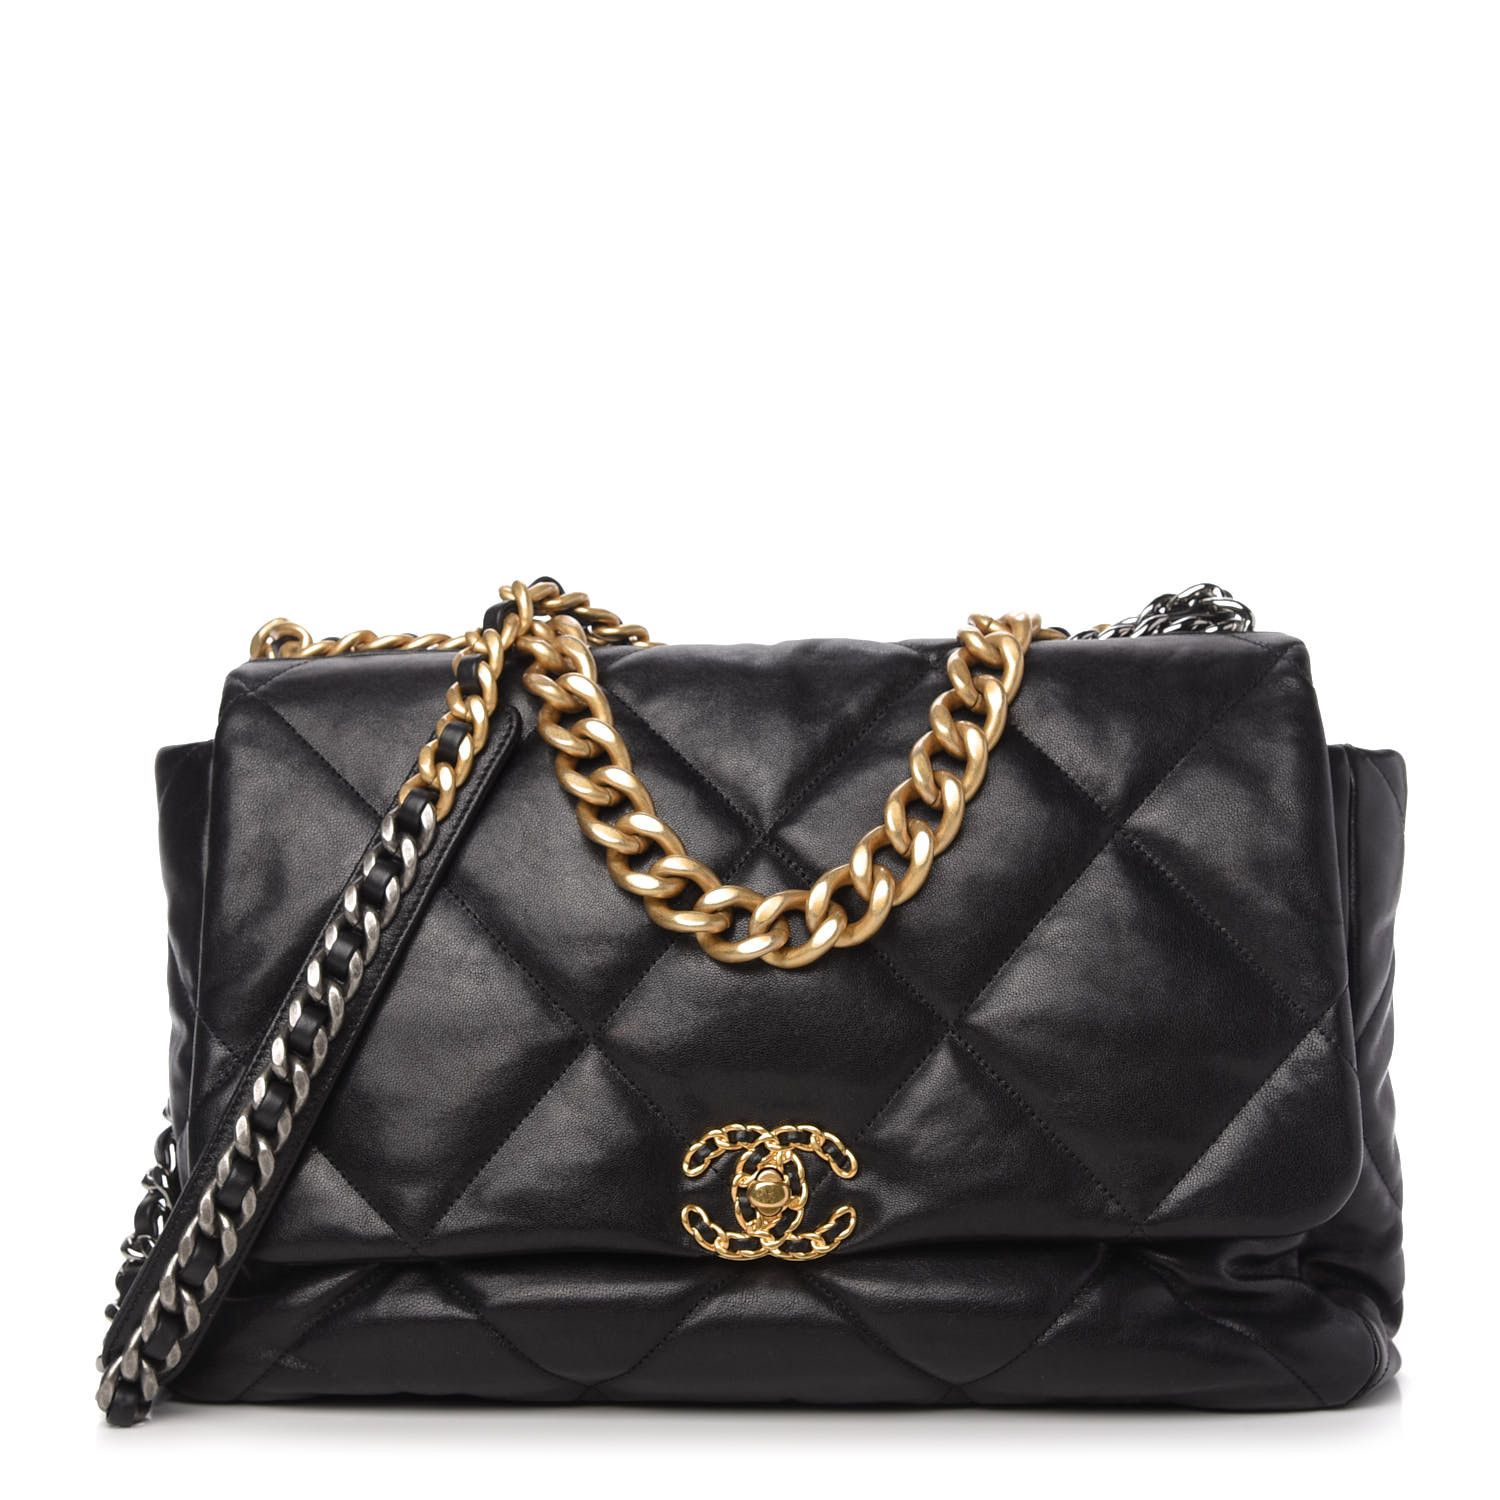 Goatskin Quilted Maxi Chanel 19 Flap Black | Fashionphile